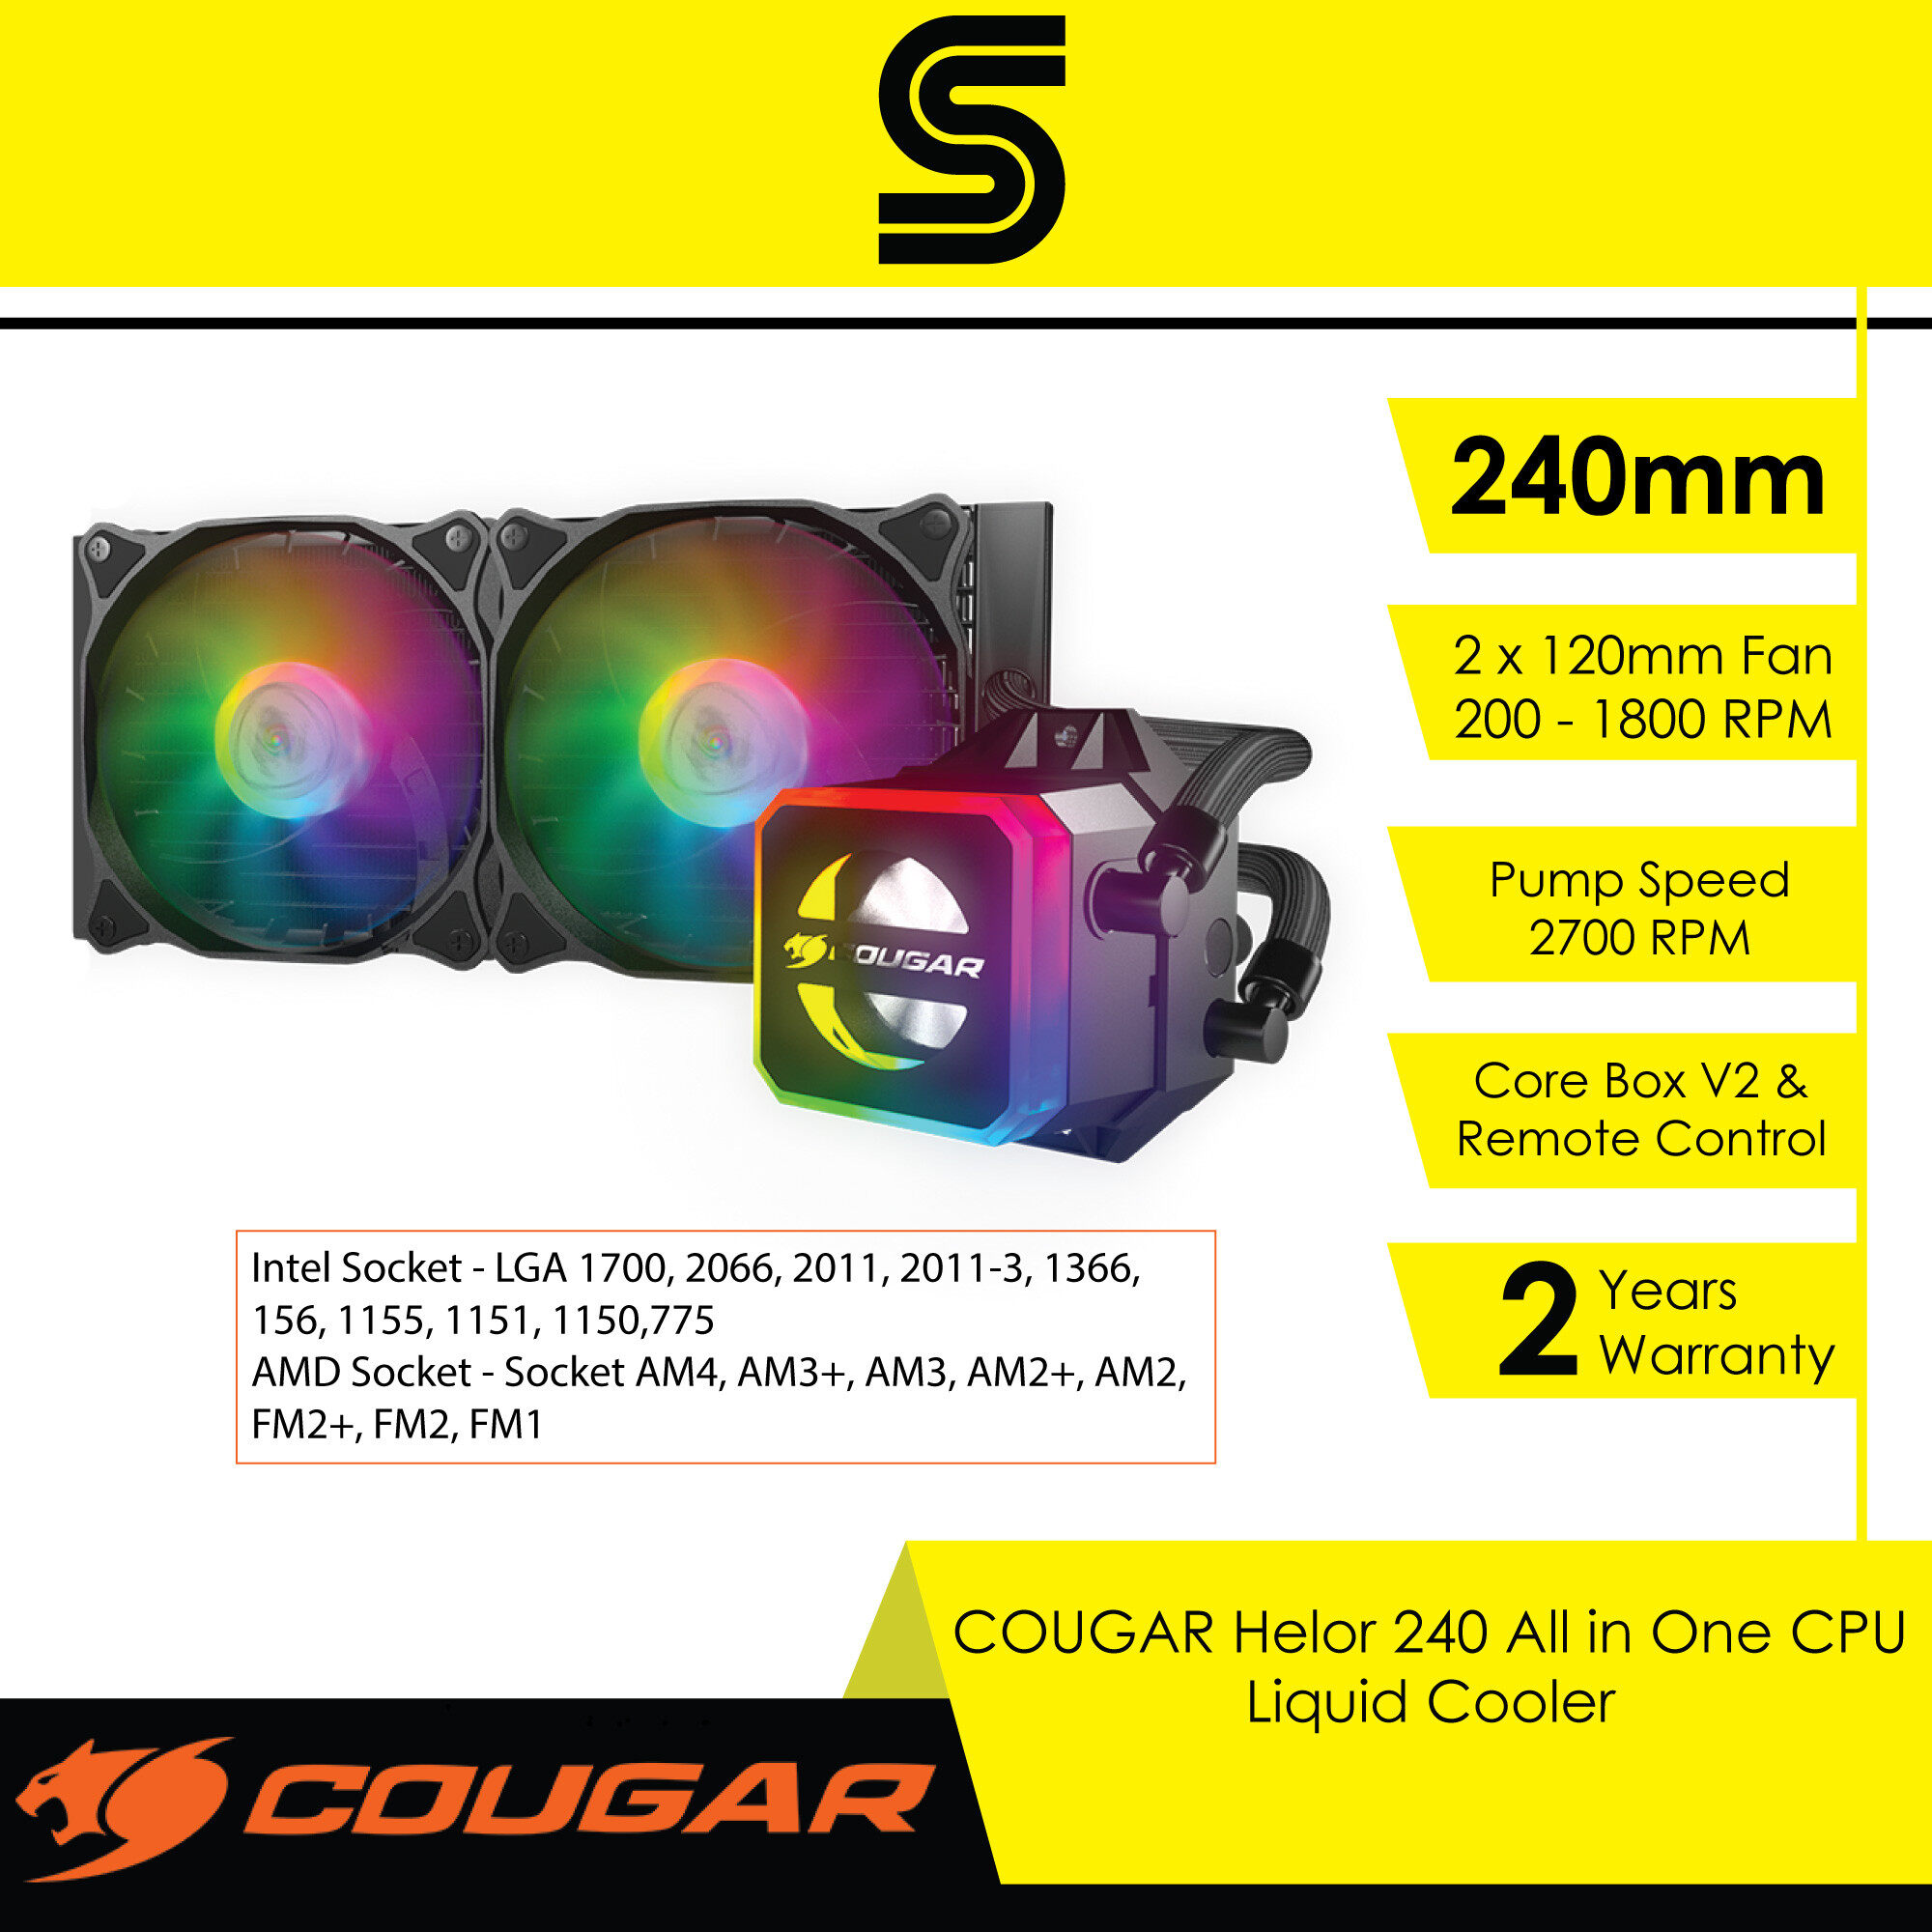 COUGAR Helor 240 All in One CPU Liquid Cooler